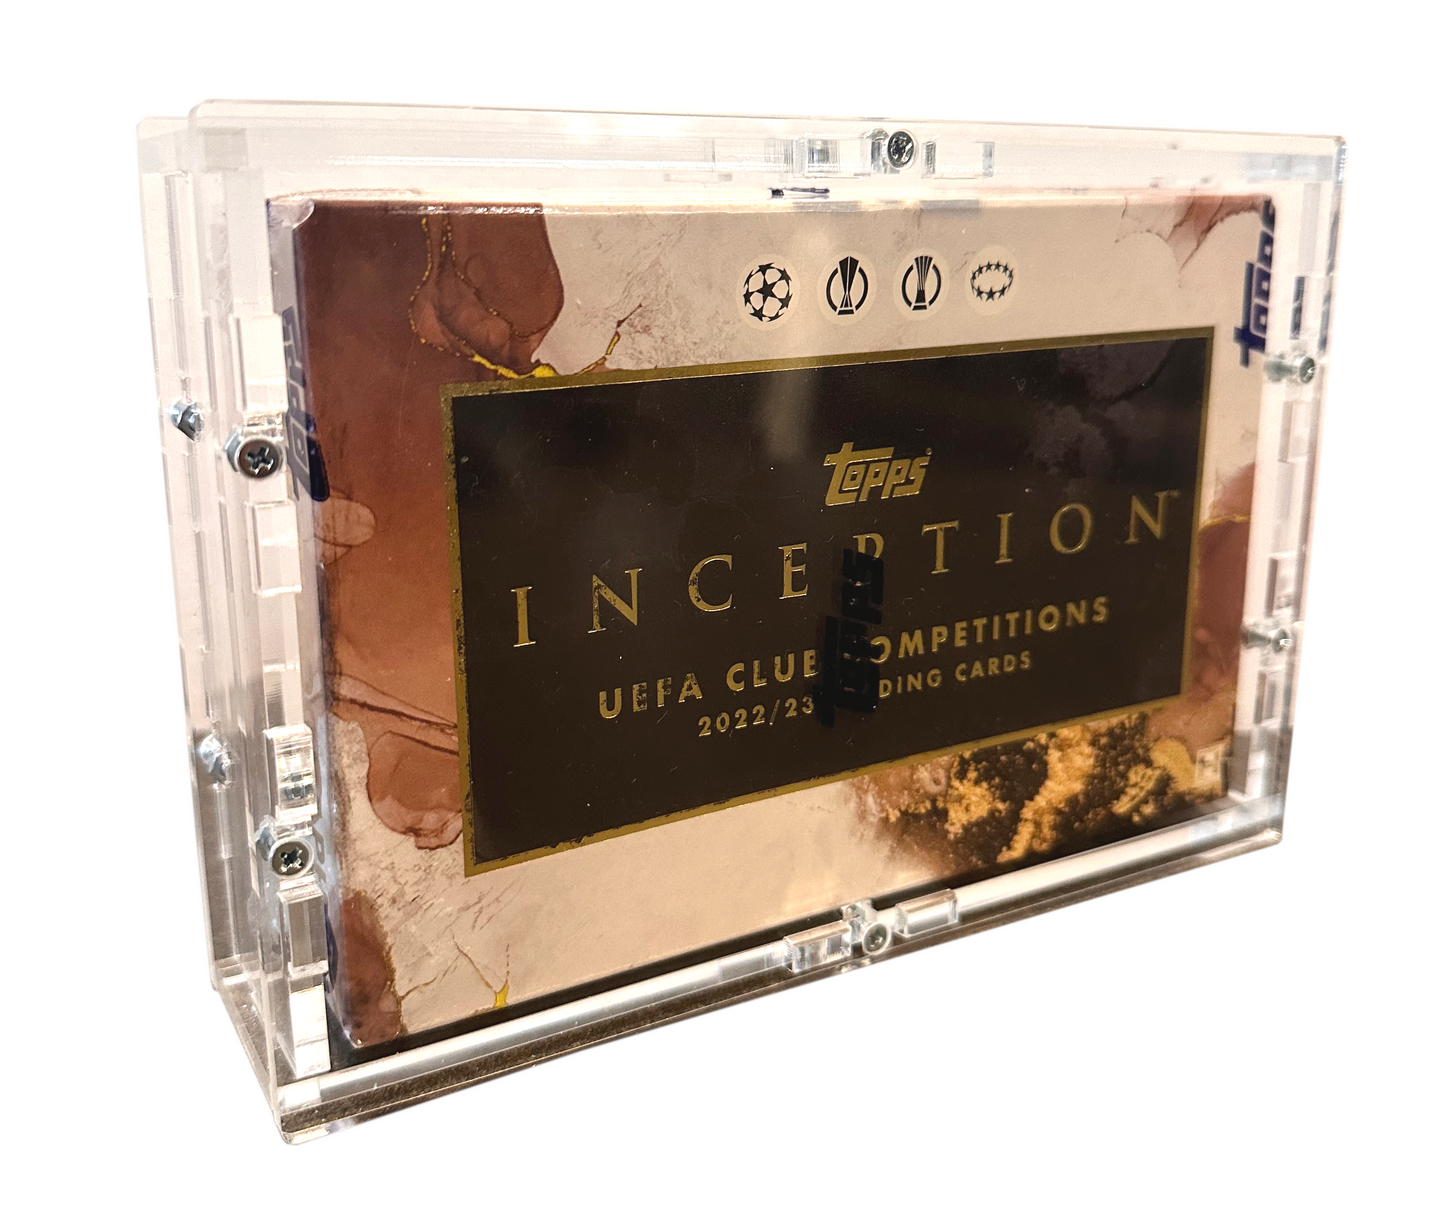 Acrylic Case for UEFA Club Completions Inception - Topps Box